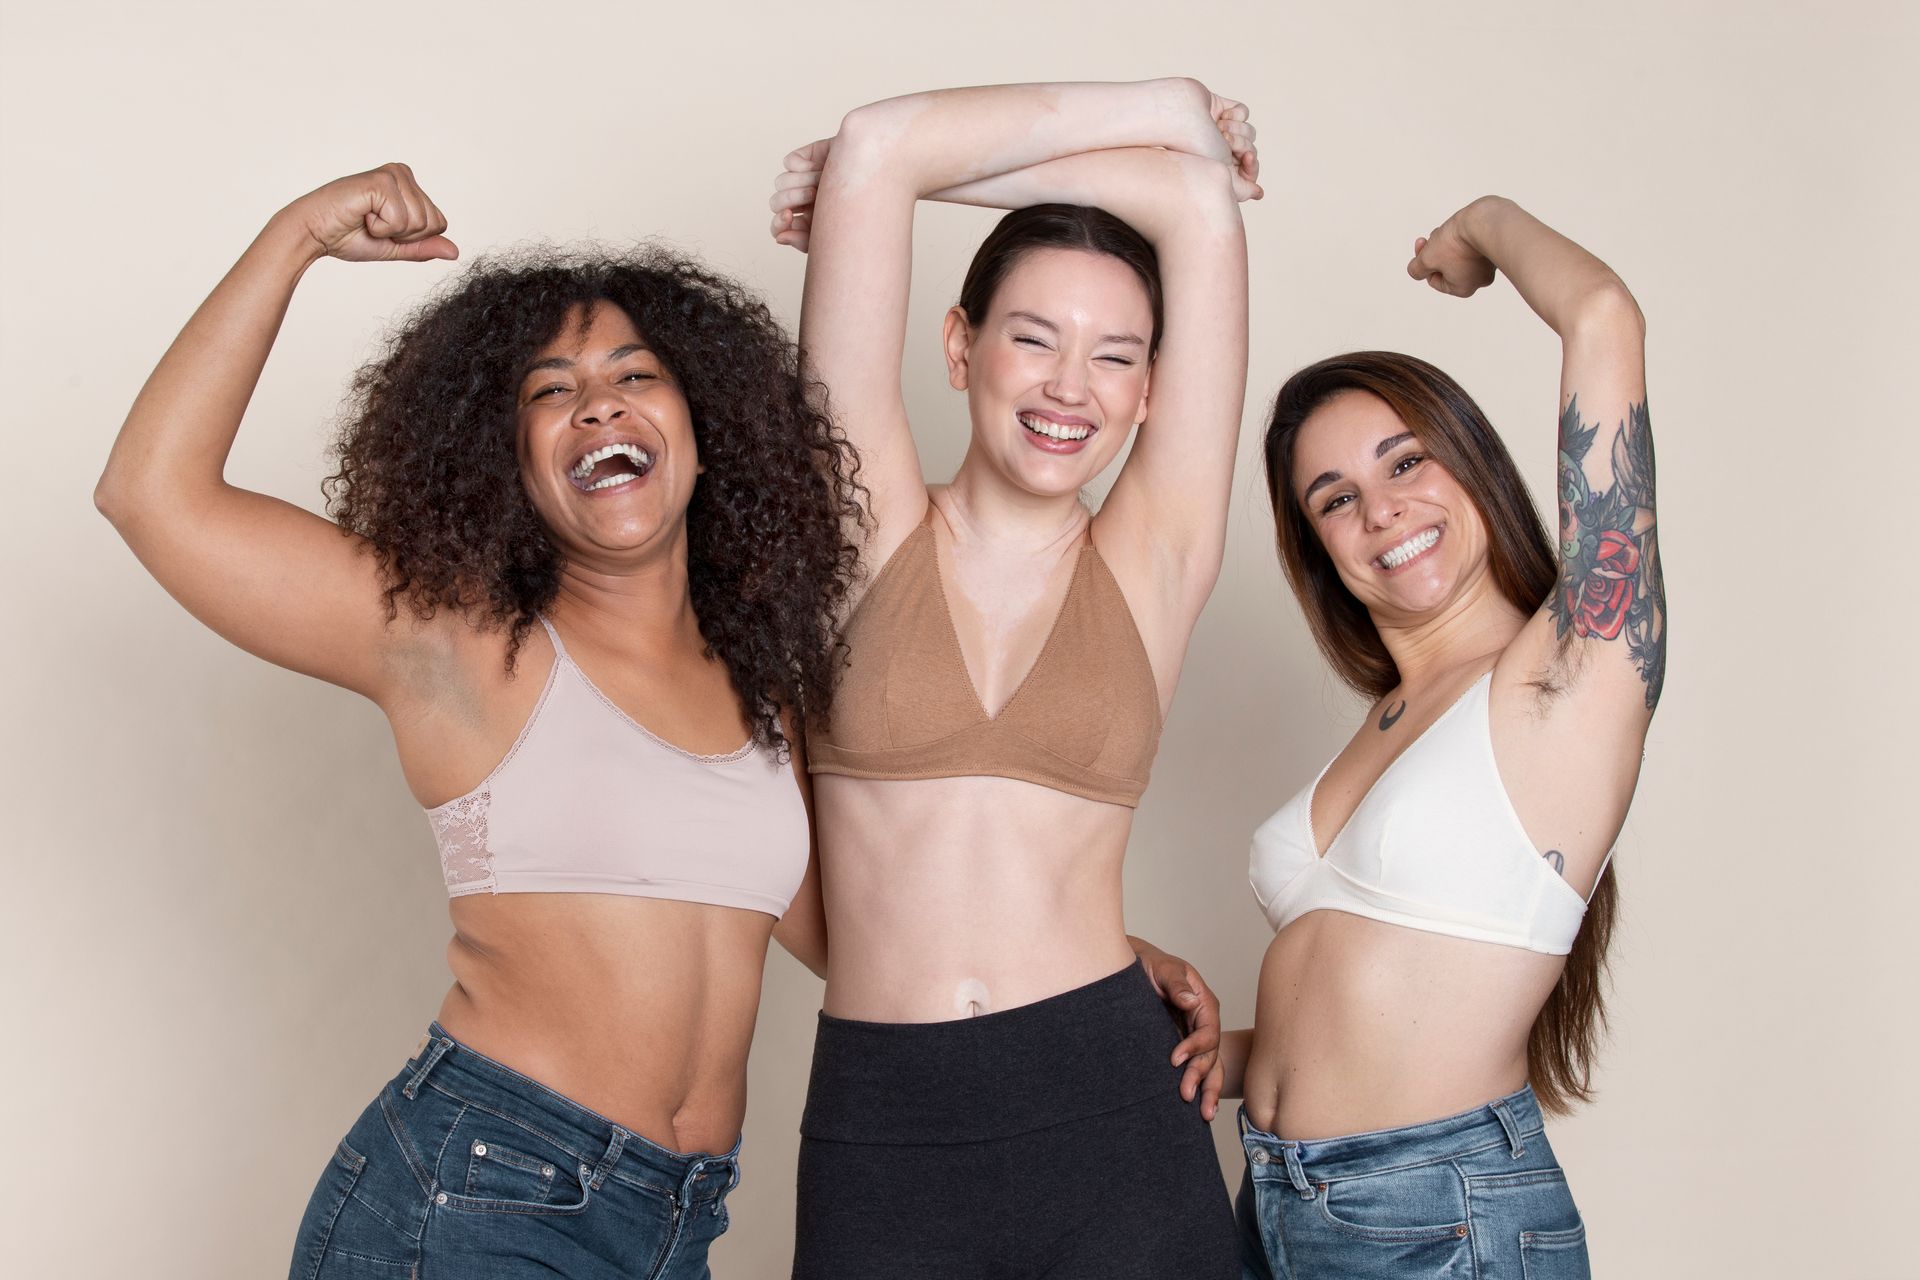 three women are posing for a picture together and flexing their muscles .